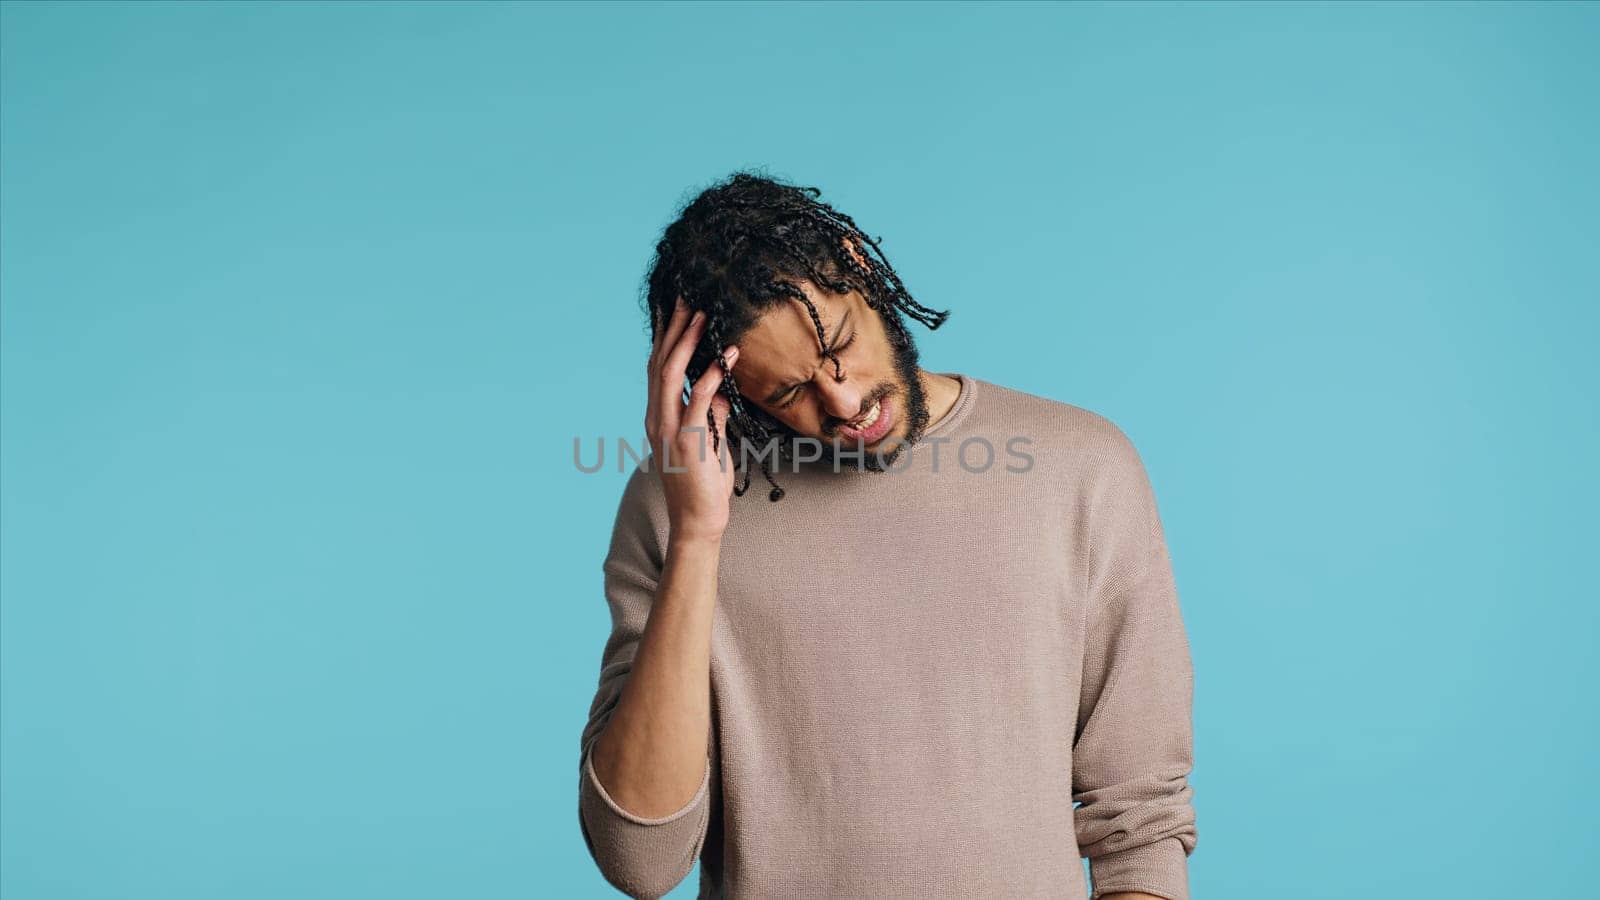 Hurt Middle Eastern man wincing from pain, suffering from headache, having health problems. Injured BIPOC person rubbing head temples, feeling discomforting strain, studio background, camera A